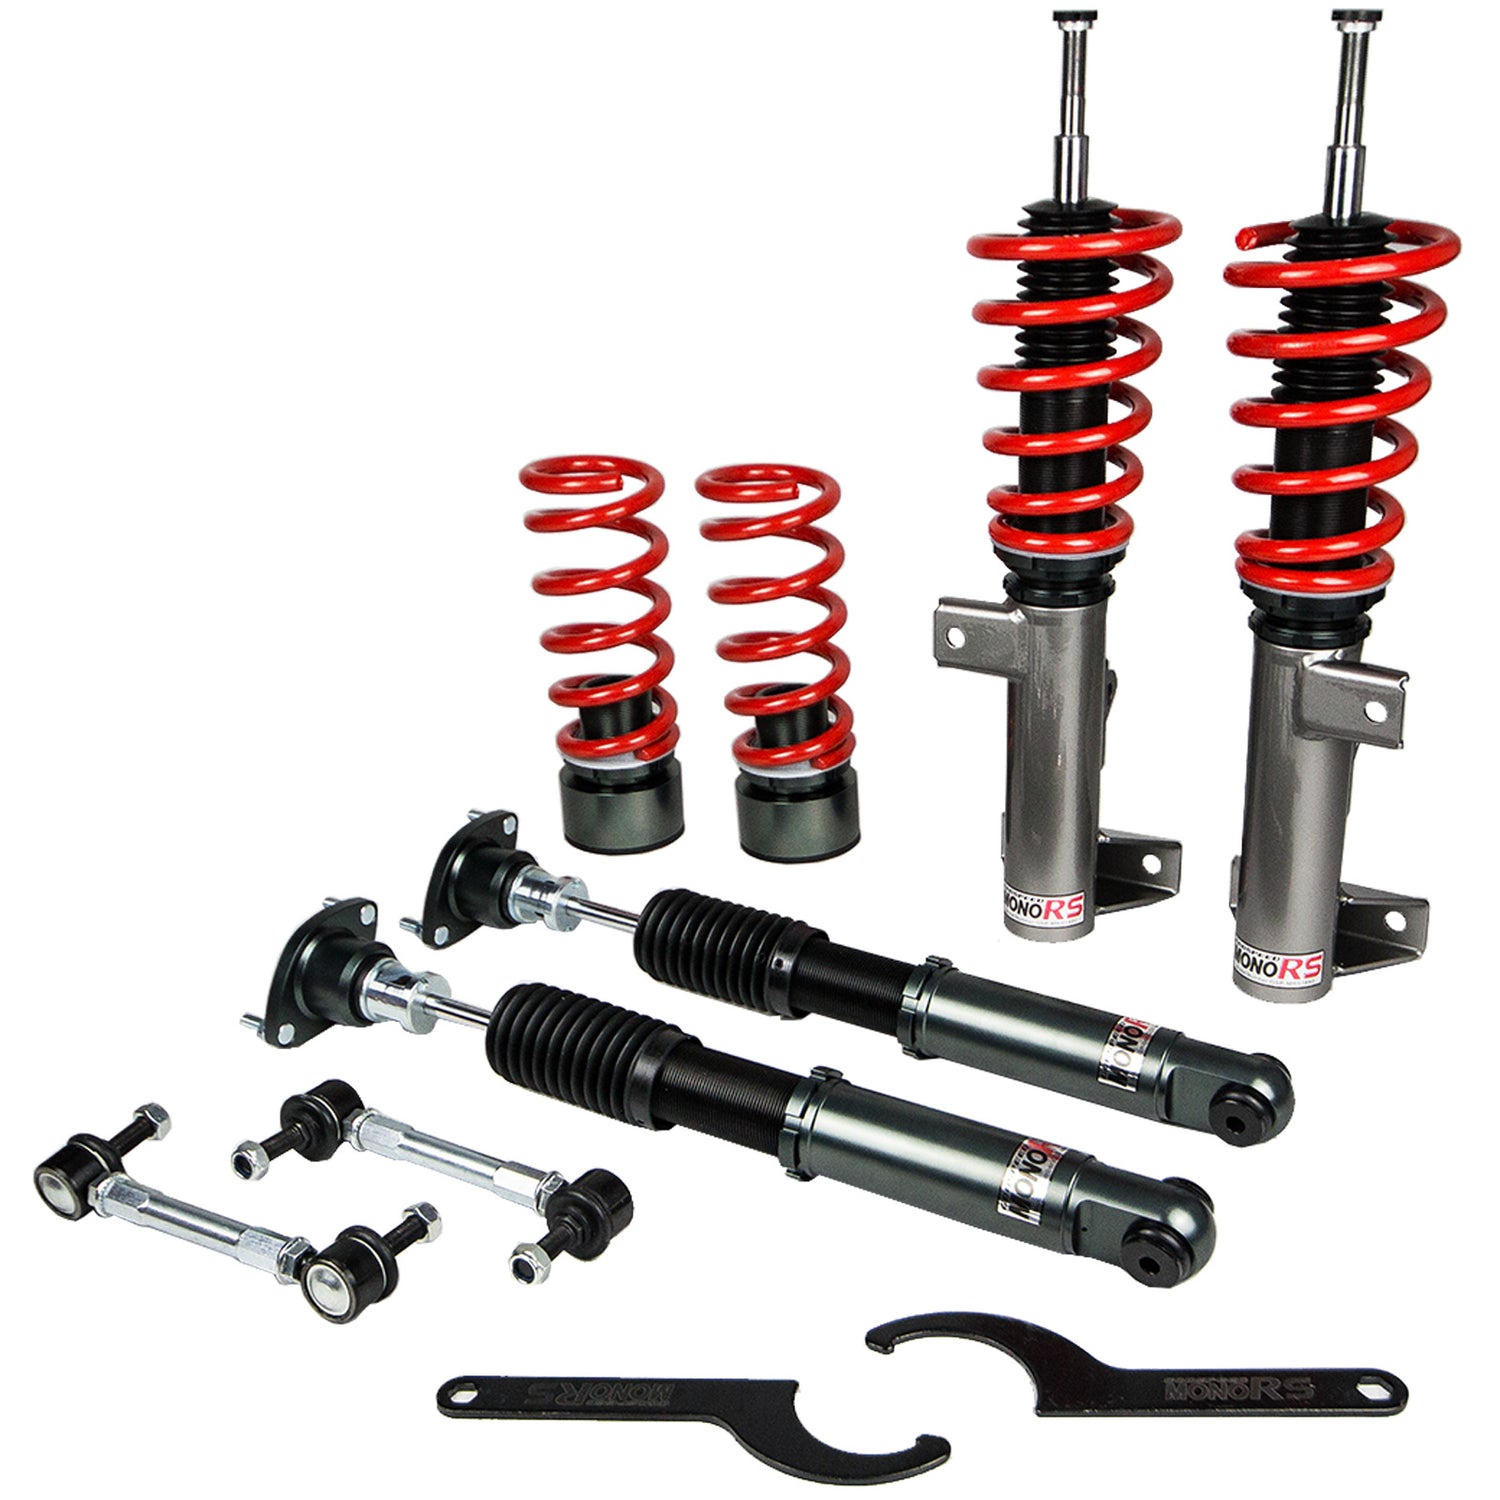 Godspeed MRS1880-A MonoRS Coilover Lowering Kit, 32 Damping Adjustment, Ride Height Adjustable